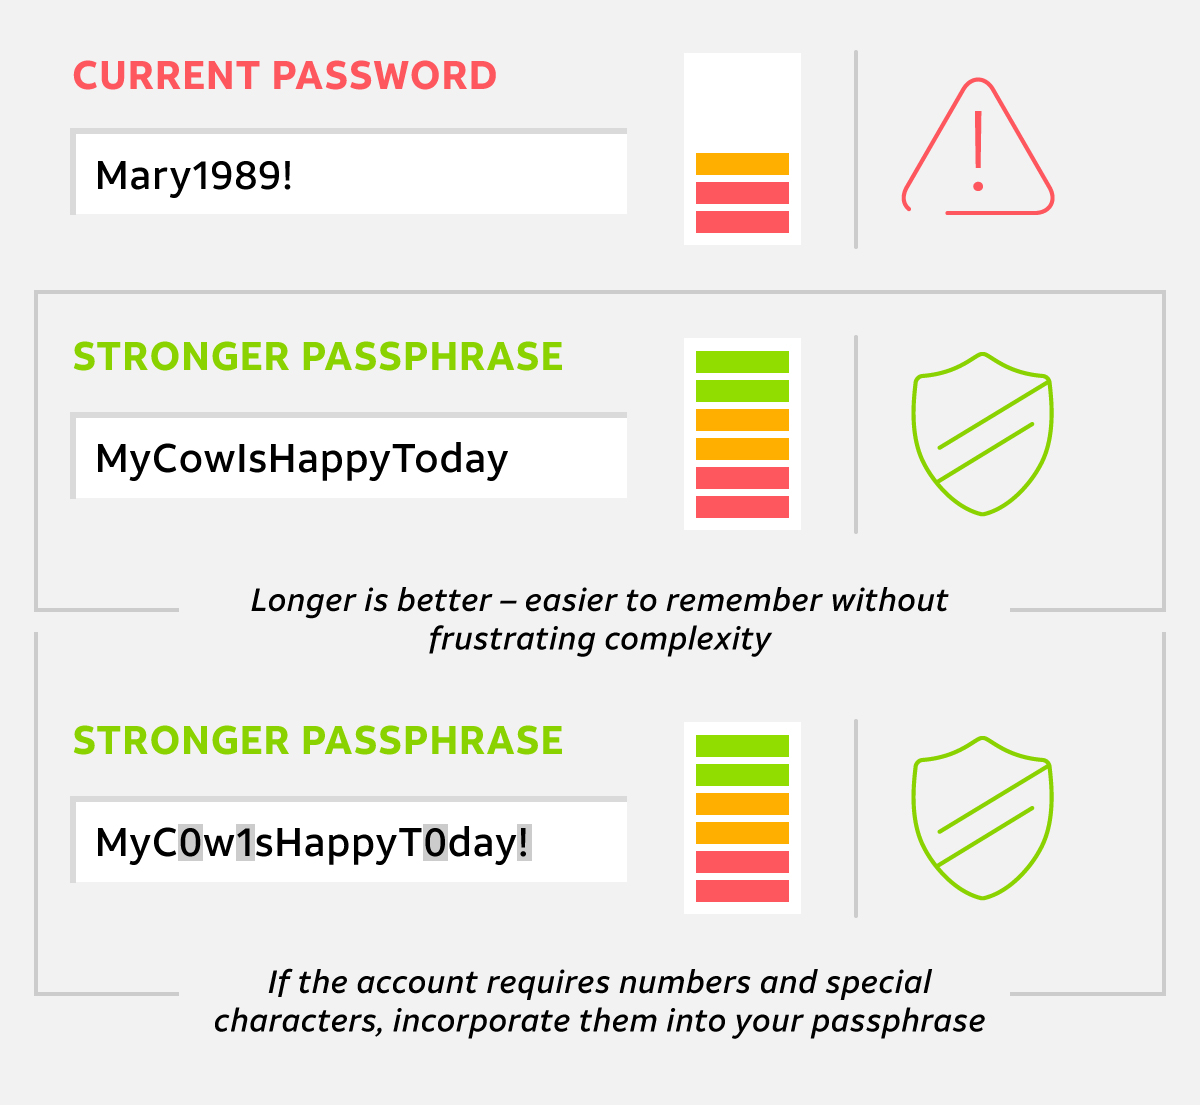 Illustration of password update page rating that says "stronger paraphrase" in bright green letters 